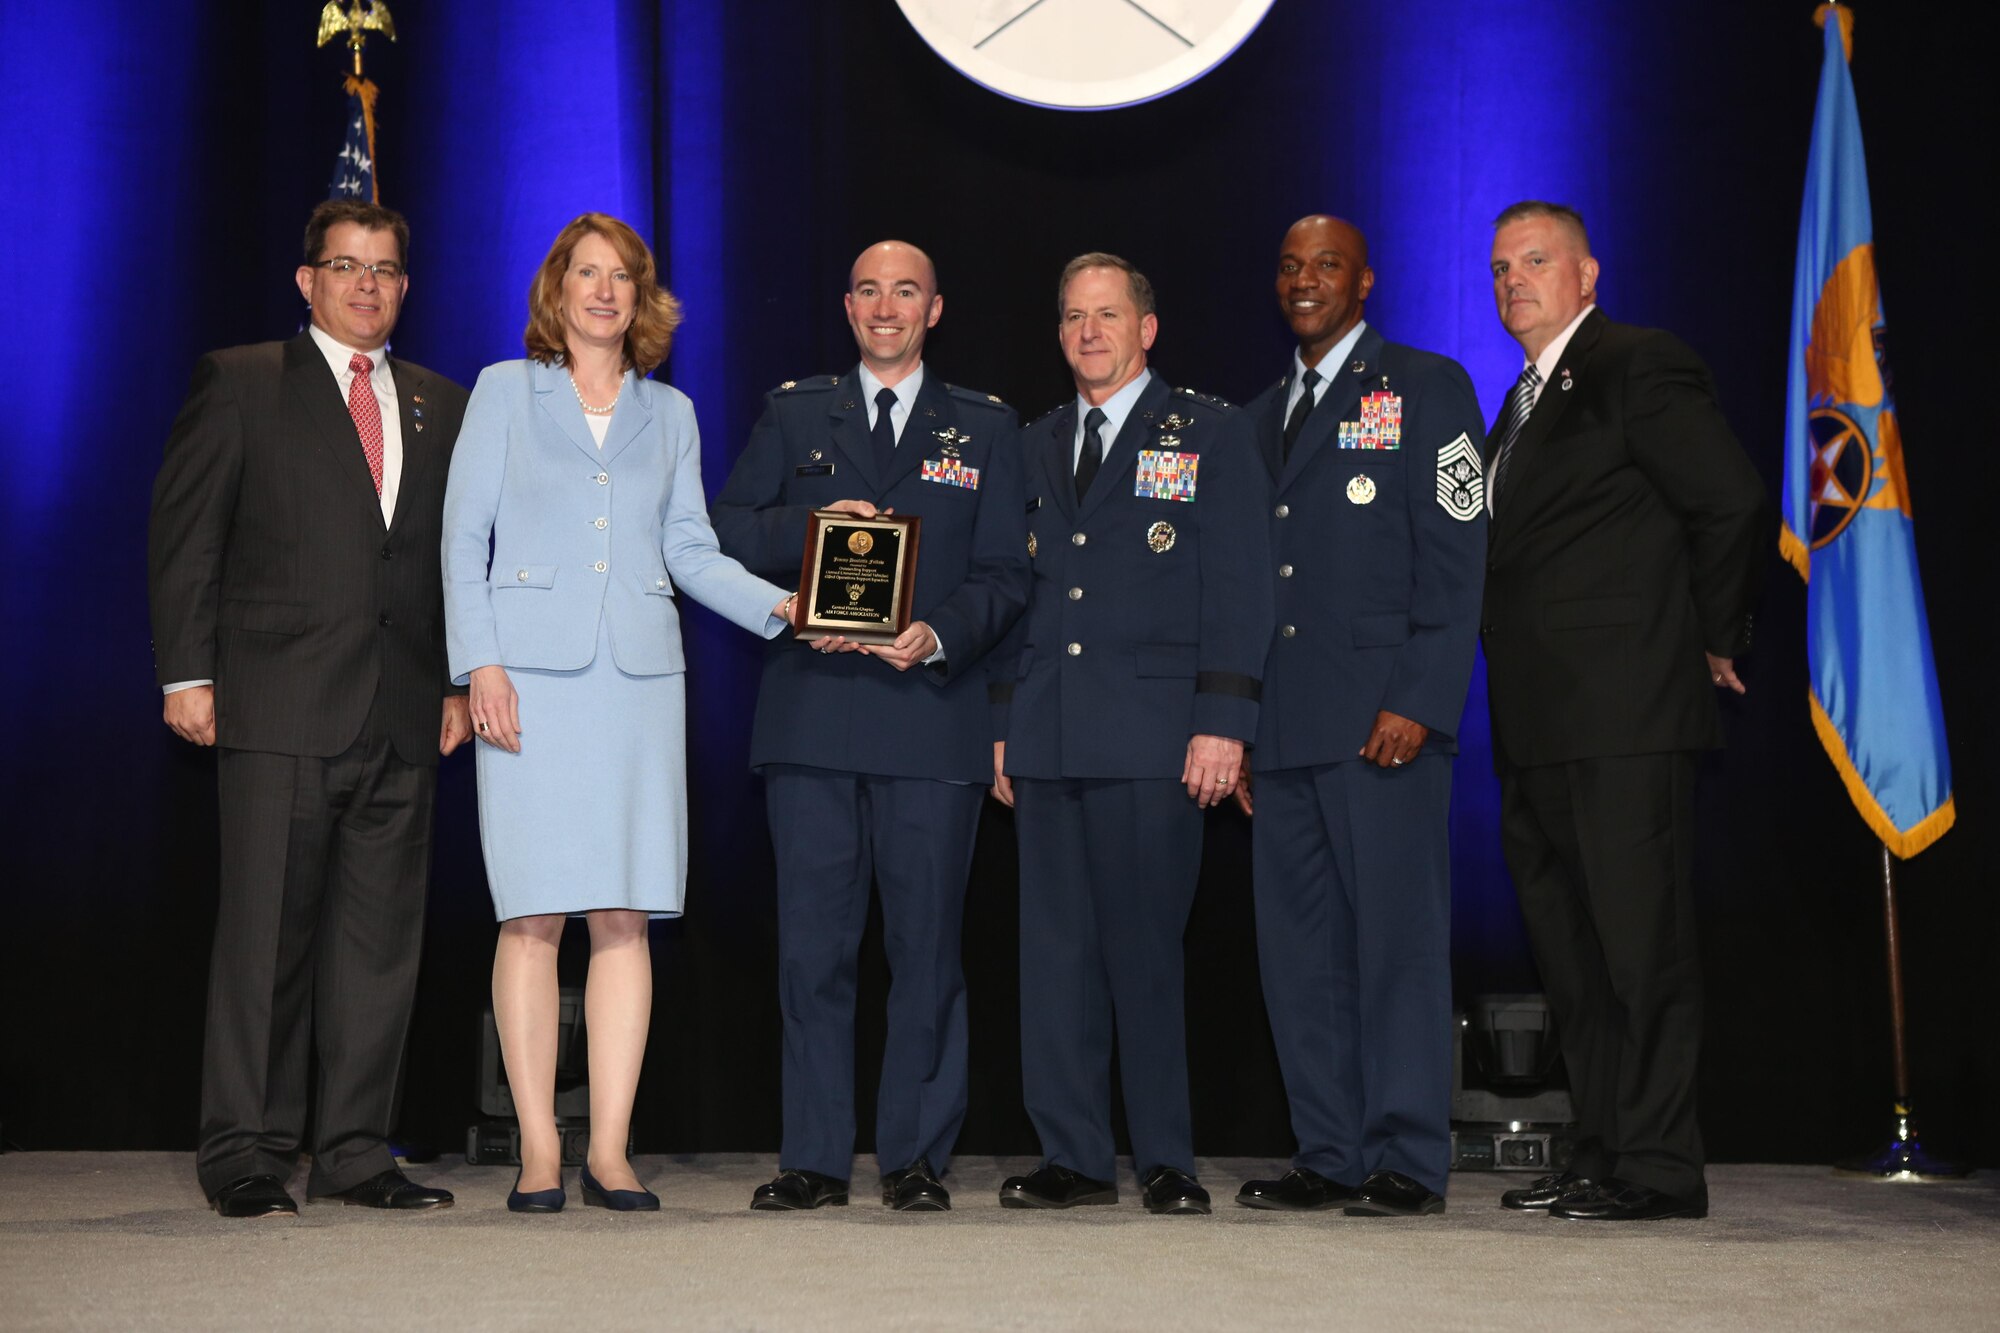 Lt. Col. Scott, former 432nd Operations Support Squadron commander, accepts the inaugural Jimmy Doolittle Educational Fellow for Outstanding Support to Armed UAVs March 2, 2017, at the Martin H. Harris Chapter of the Air Force Association Air Force Gala banquet in Orlando, Florida. Acting Secretary of the Air Force, Lisa Disbrow, presented the award alongside, from left, Air Force Gala Chairman Michael Liquori, Chief of Staff of the Air Force Gen. David Goldfein, Chief Master Sgt. of the Air Force Kaleth Wright and Martin H. Harris Chapter President Gary Lehmann. (Courtesy Photo)